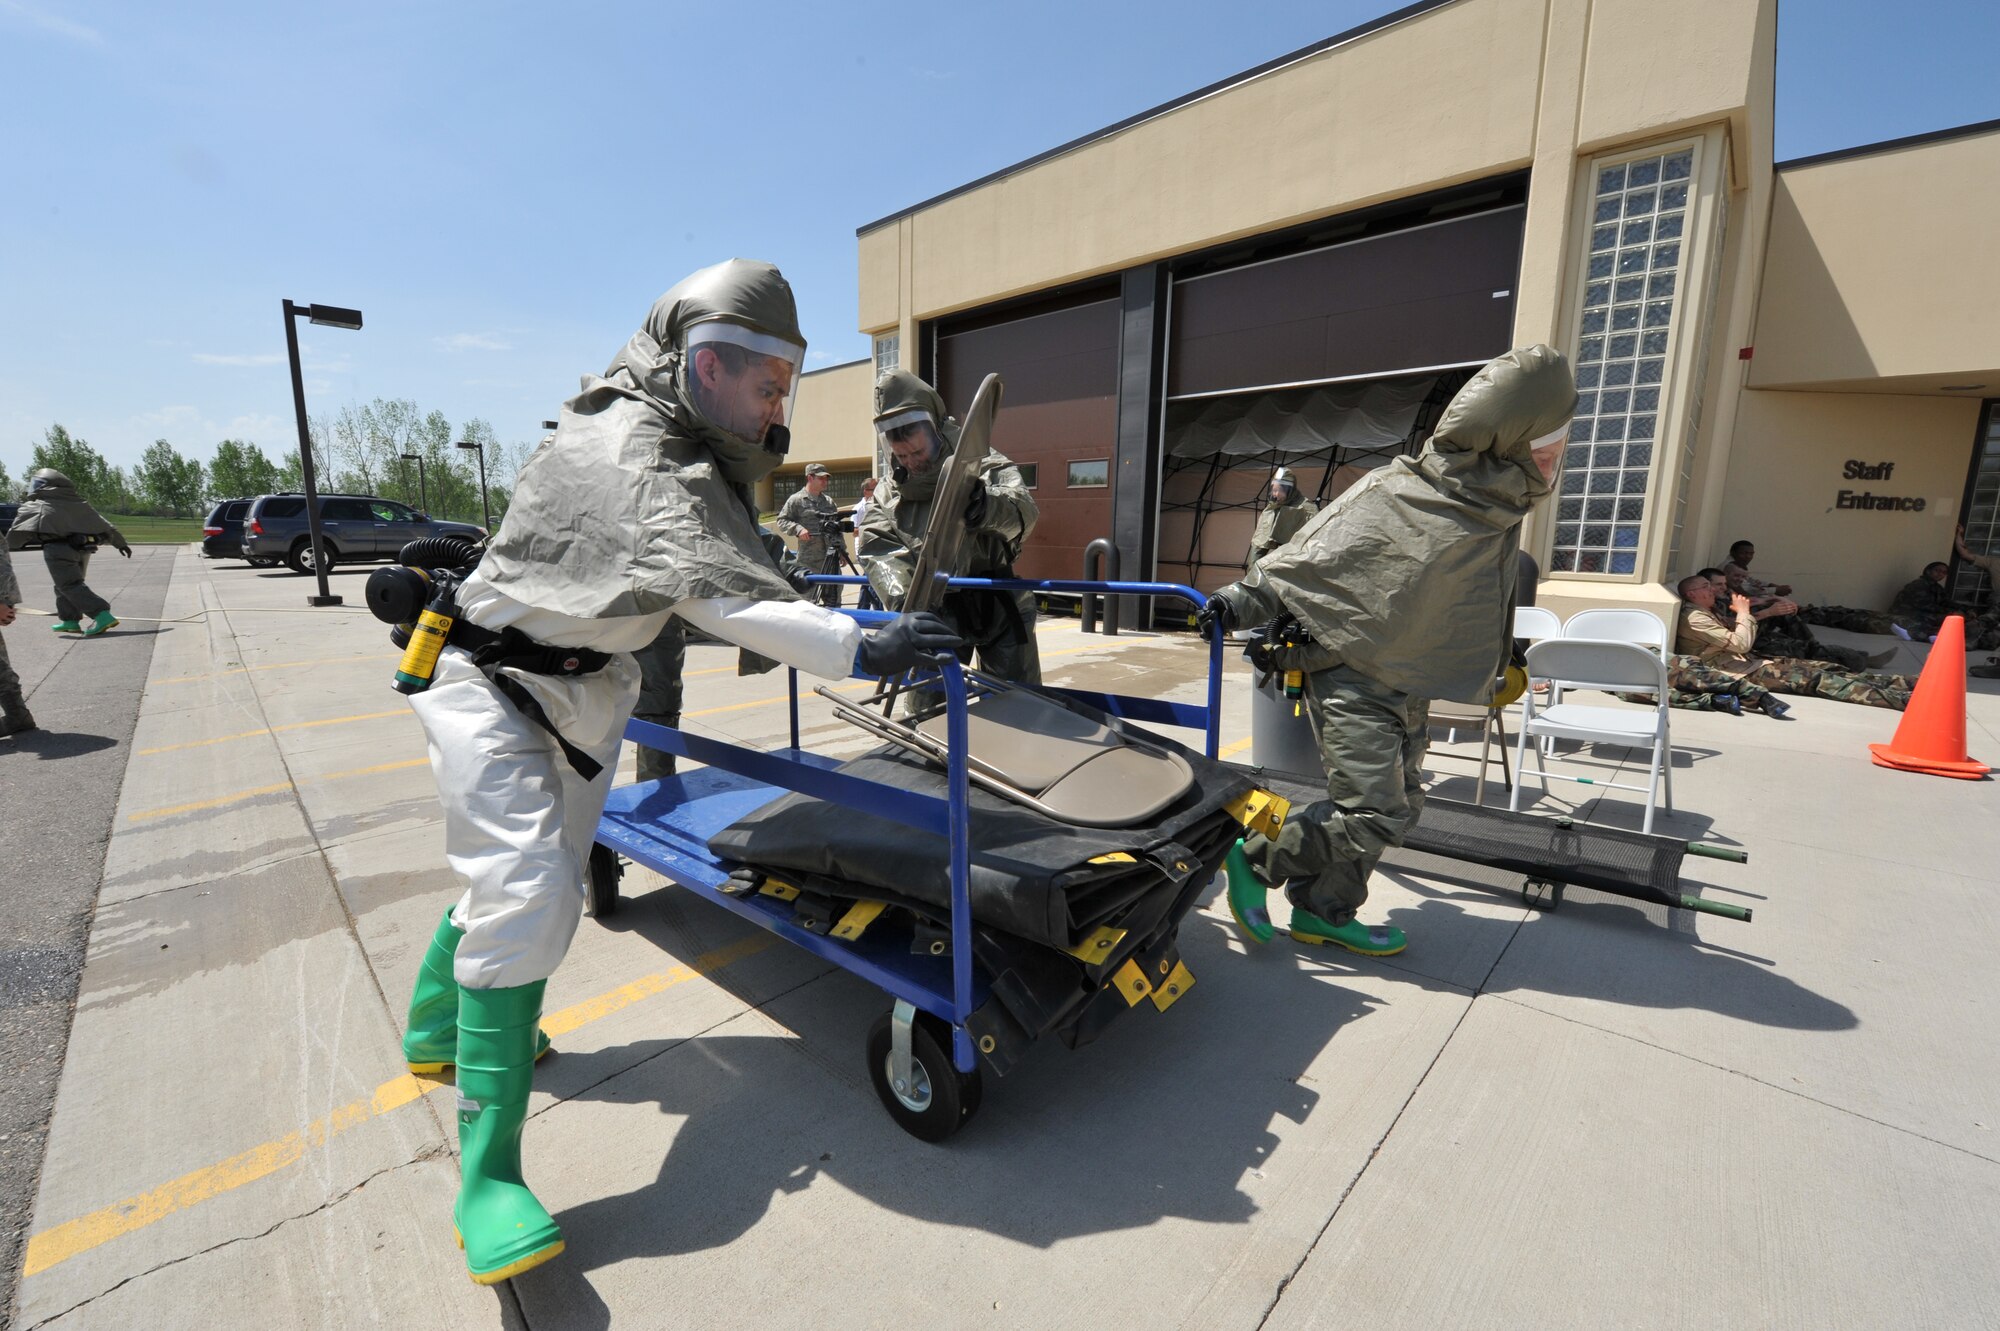 MINOT AIR FORCE BASE, N.D. -- Airmen from the 5th Medical Group stage a decontamination zone during a major accident response exercise here May 17. The exercise was designed to test the readiness and effectiveness of medical contingency response plan procedures. (U.S. Air Force photo/Senior Airman Brittany Y. Auld)